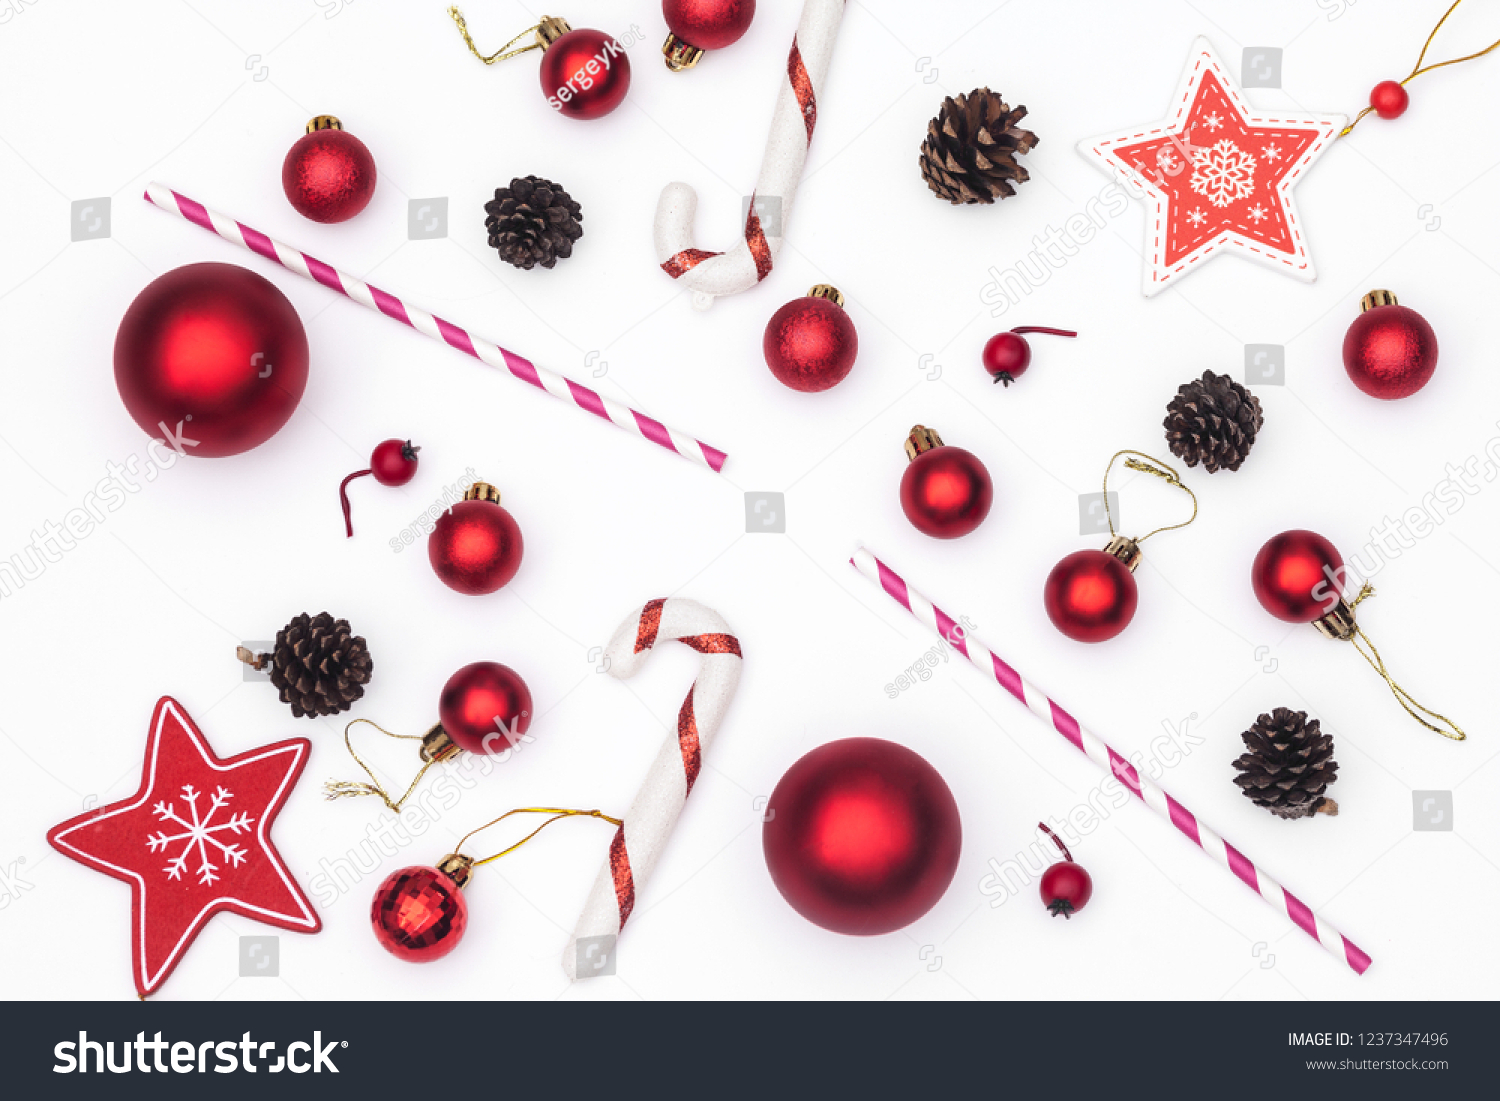 Christmas composition isolated on white. Striped straws, red glass balls and cocktail sticks. New Year flat lay, top view. #1237347496